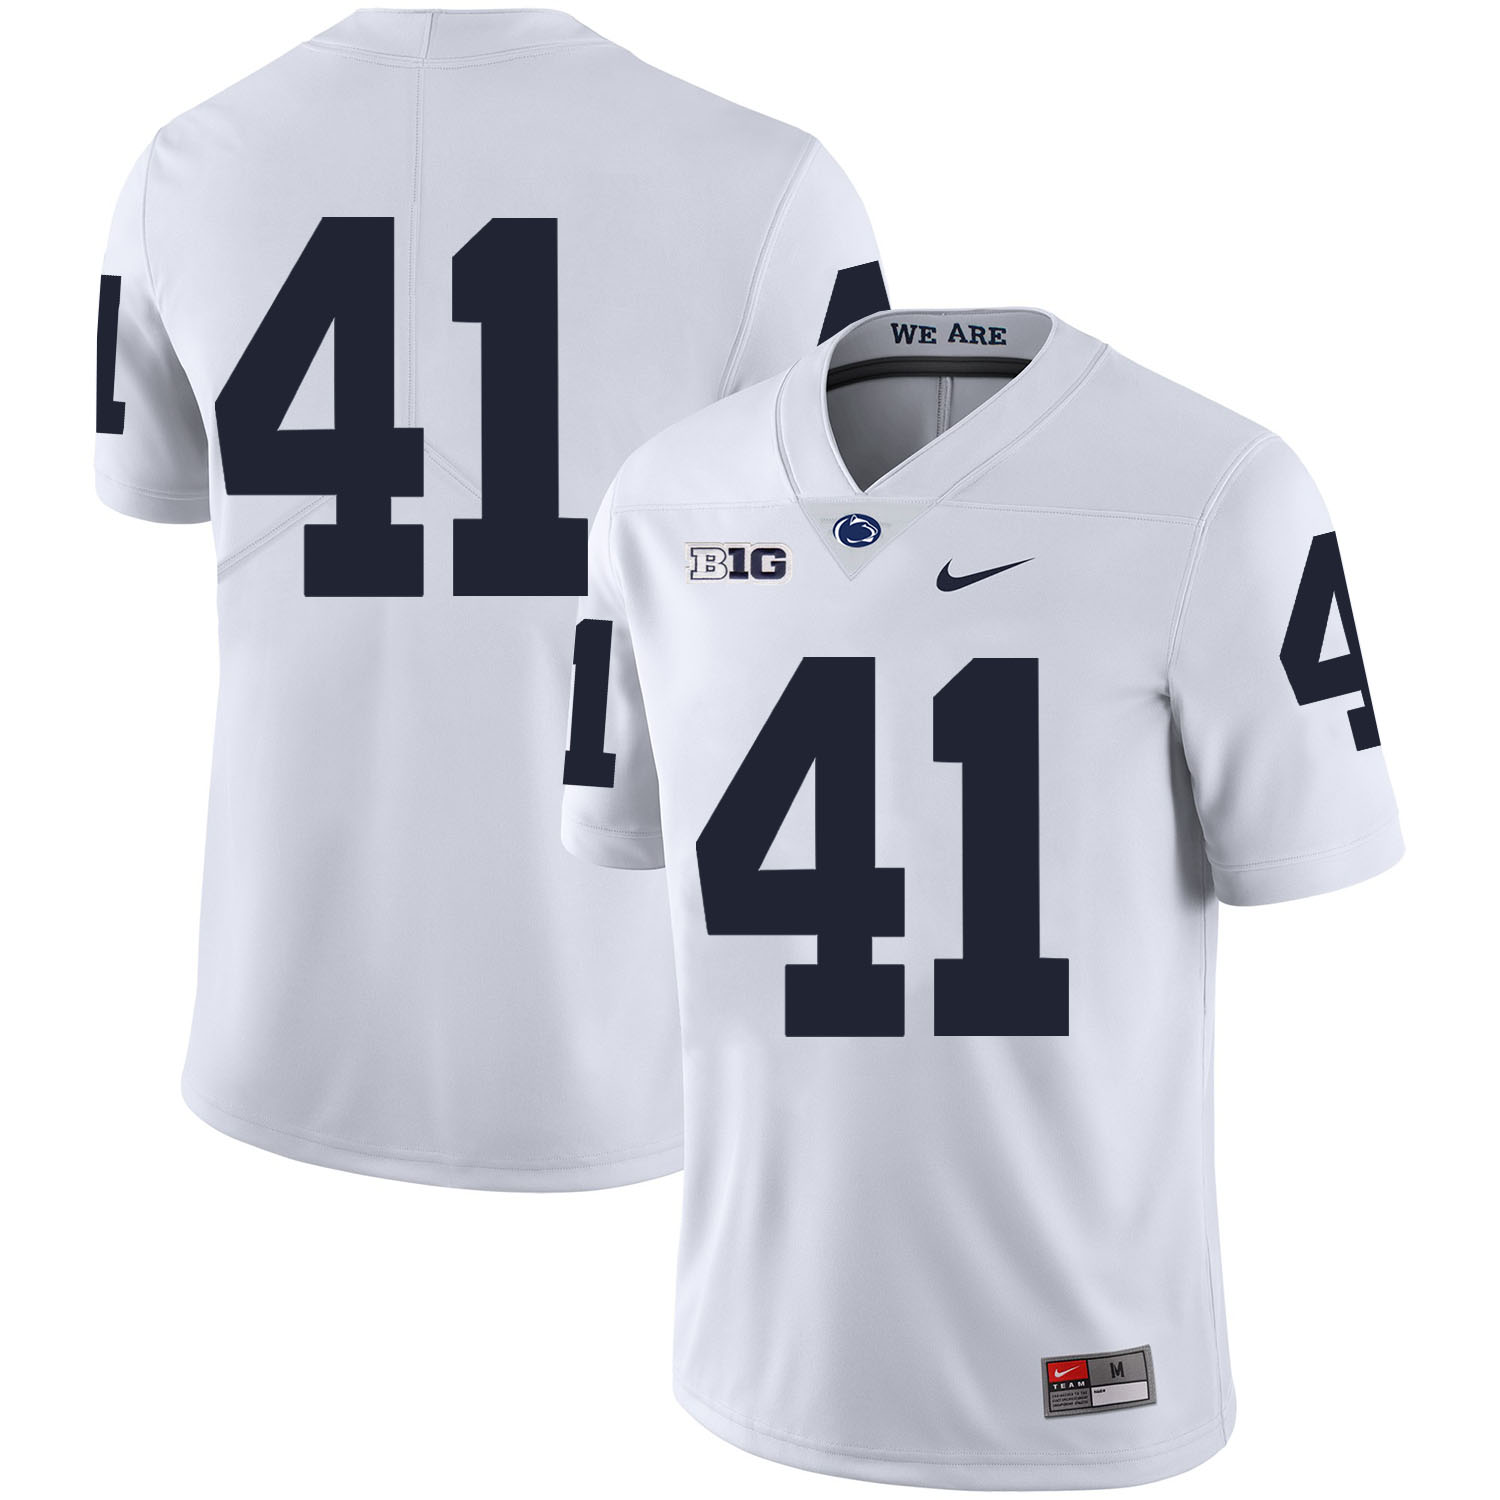 Penn State Nittany Lions 41 Parker Cothren White Nike College Football Jersey